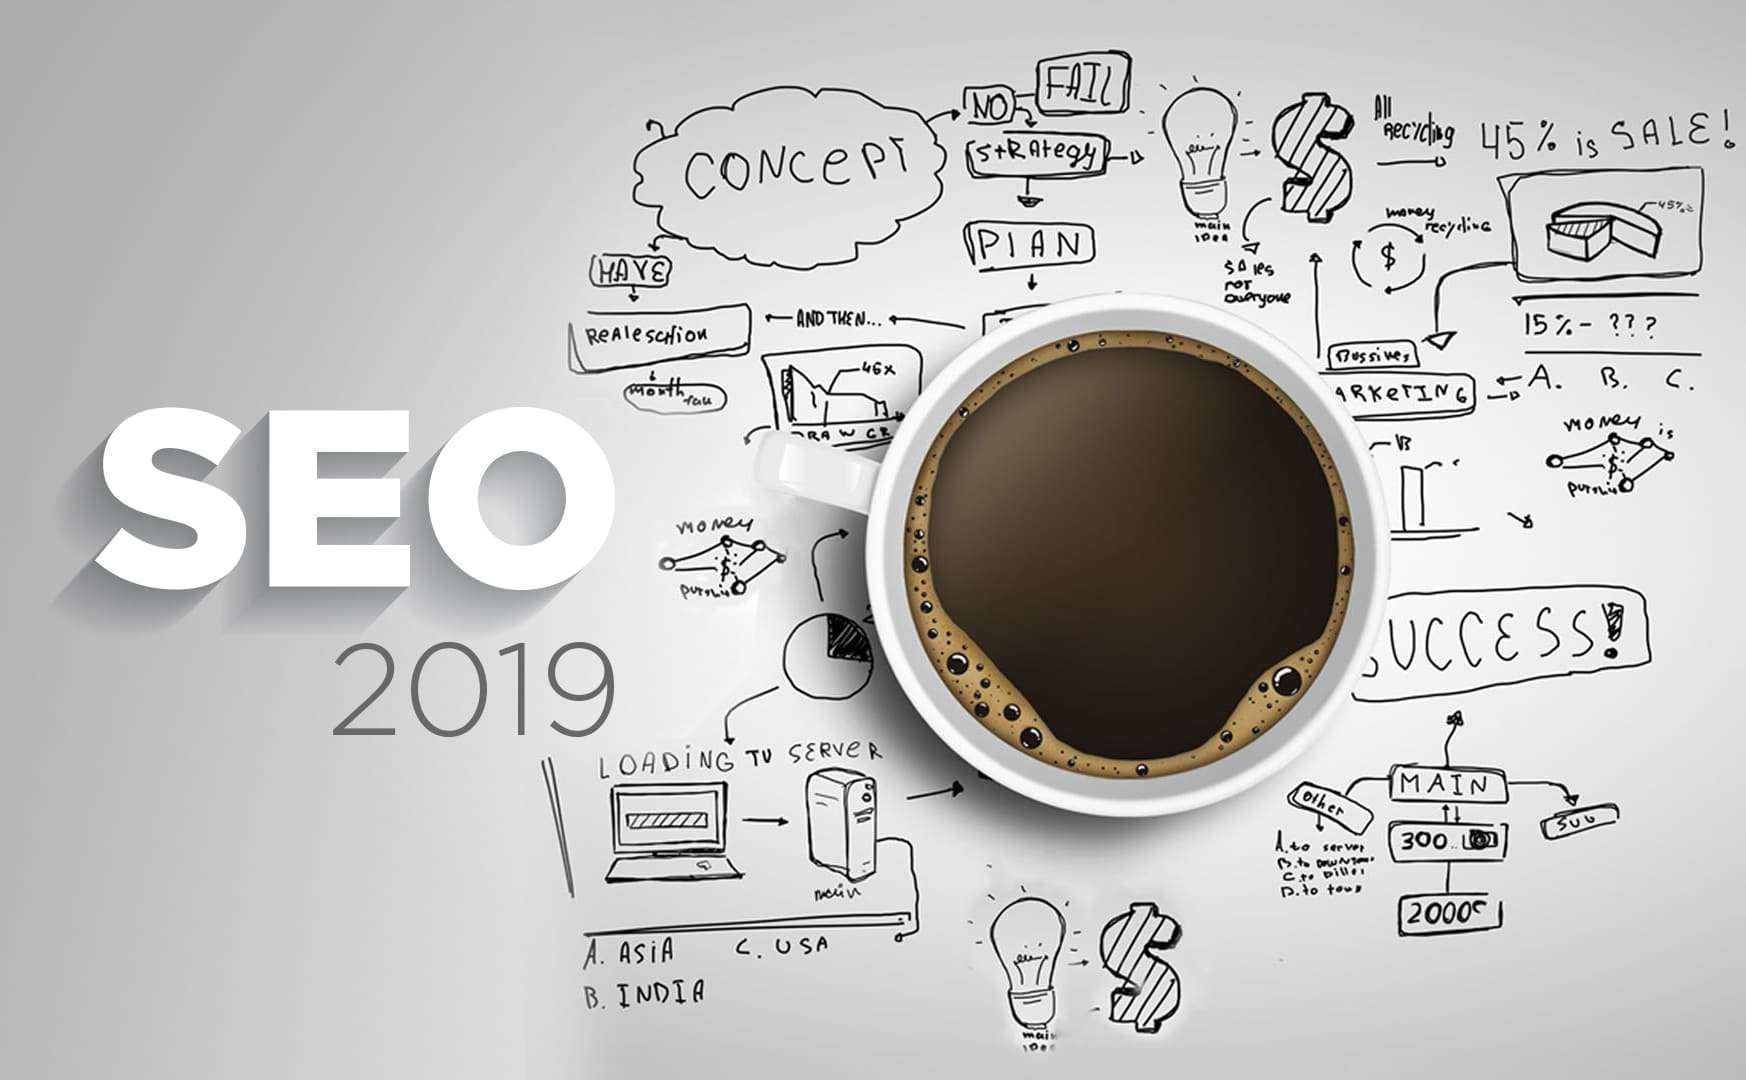 How to promote a website: SEO in 2019